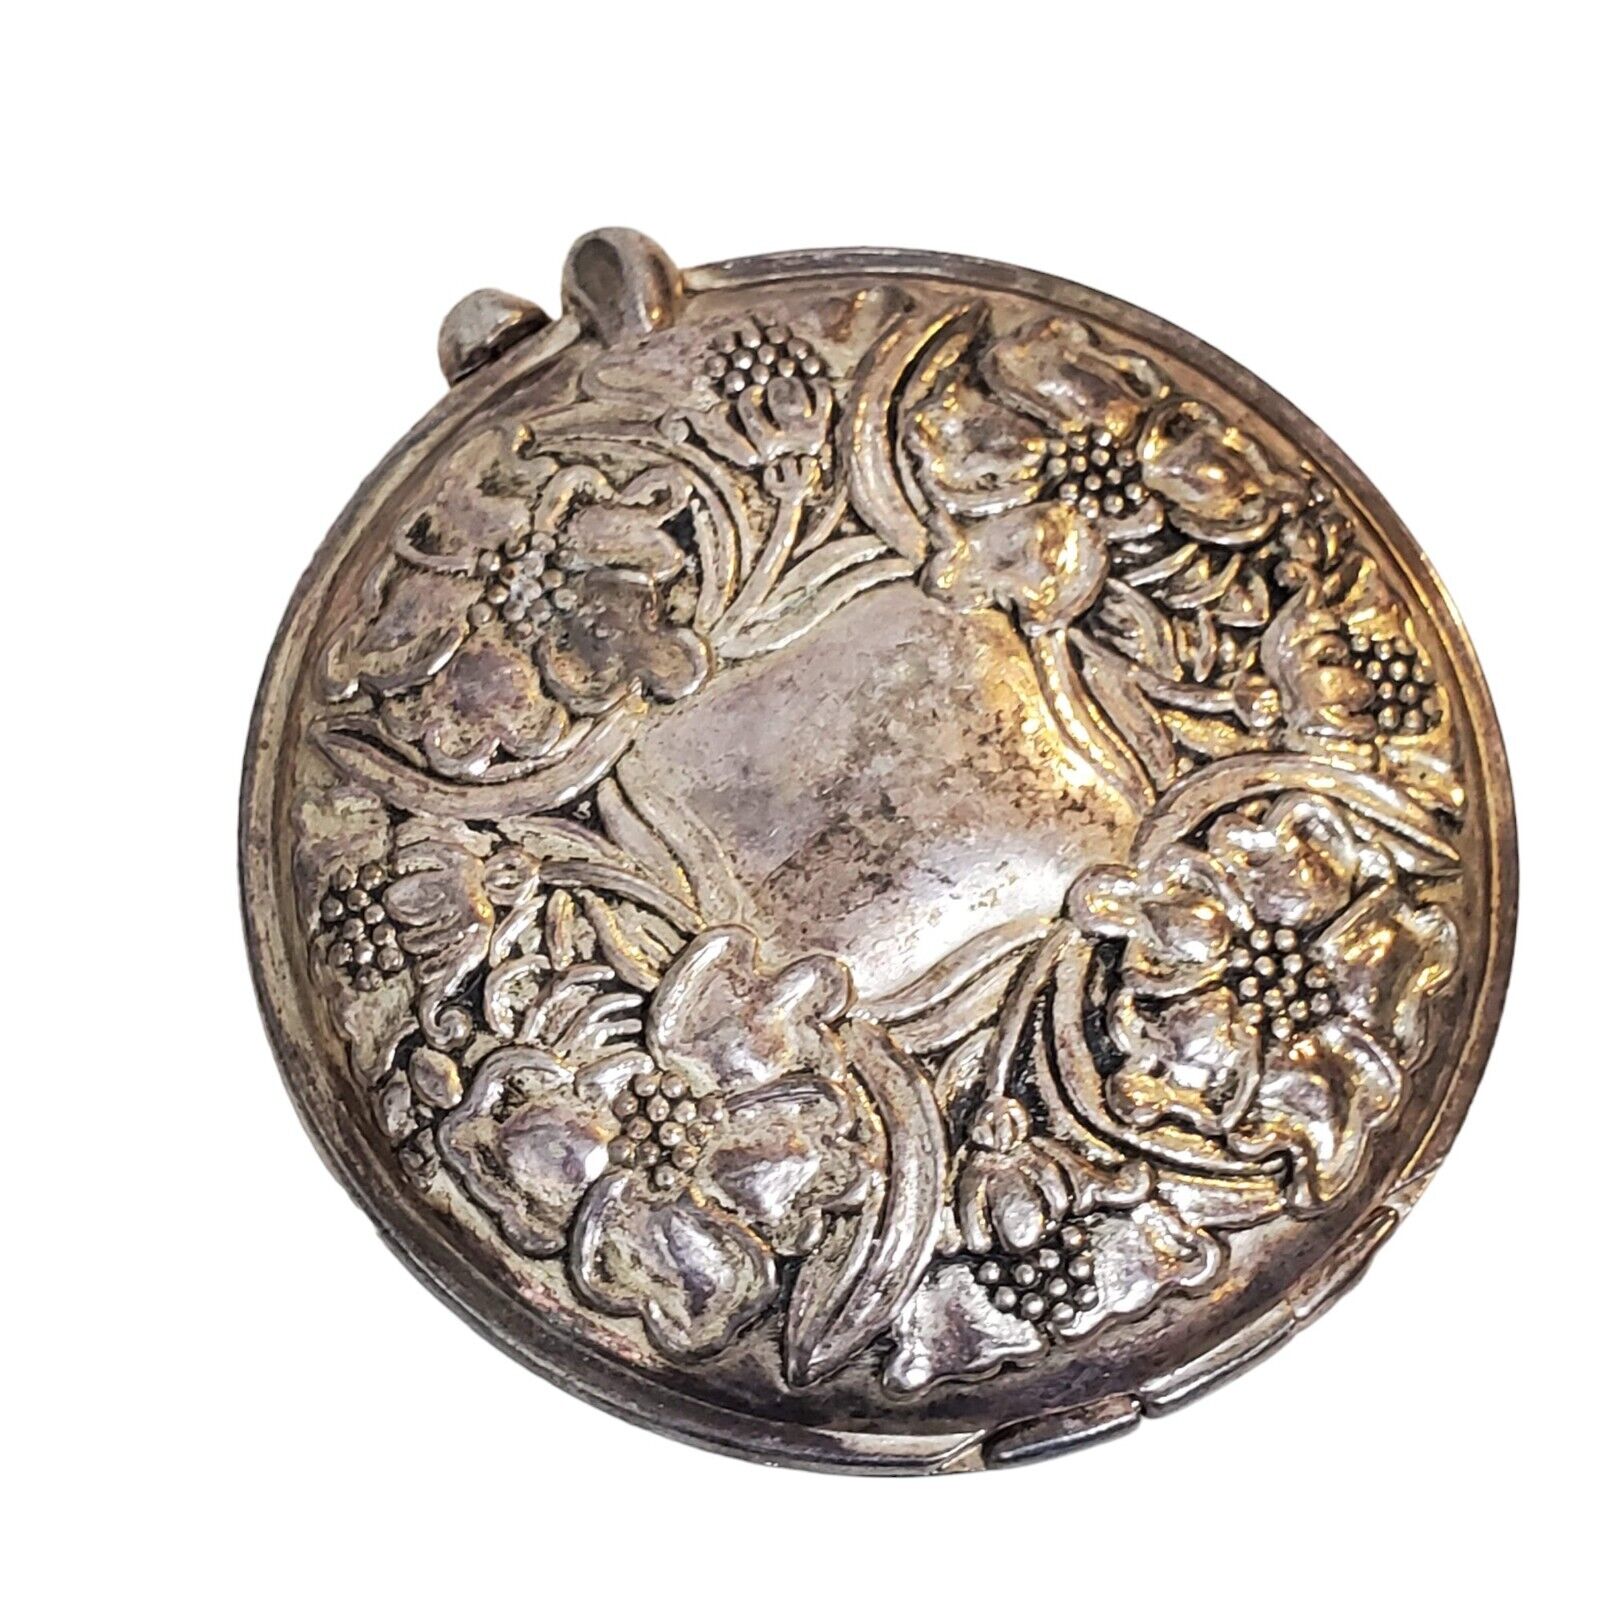 Vintage 1928 Silver Tone Floral embossed Scroll Design Powder Compact Mirror